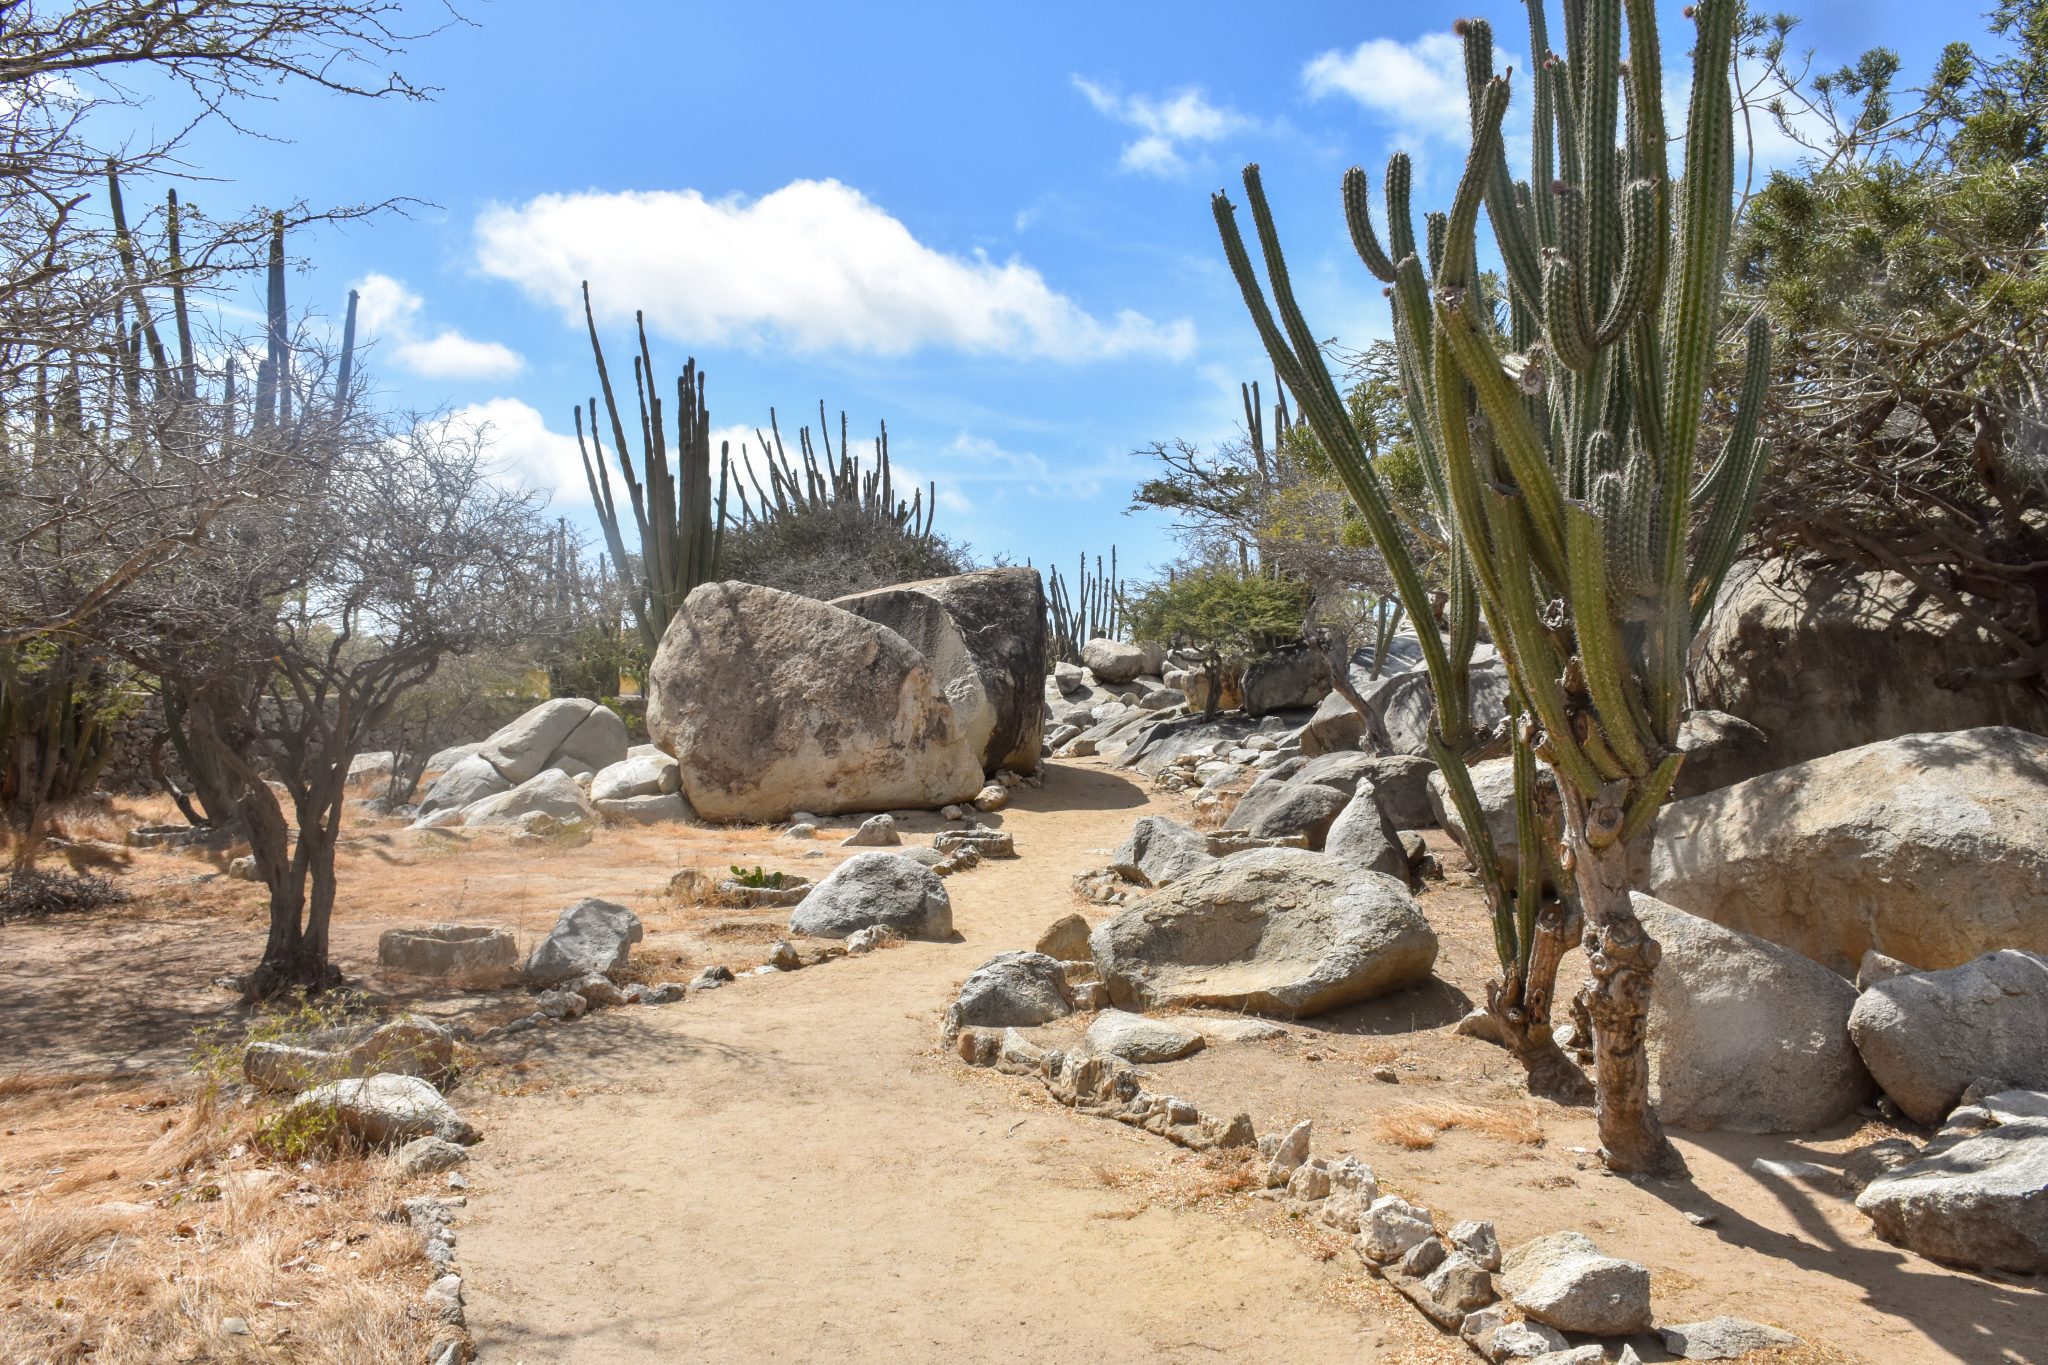 Large rocks and cactus plants in Aruba